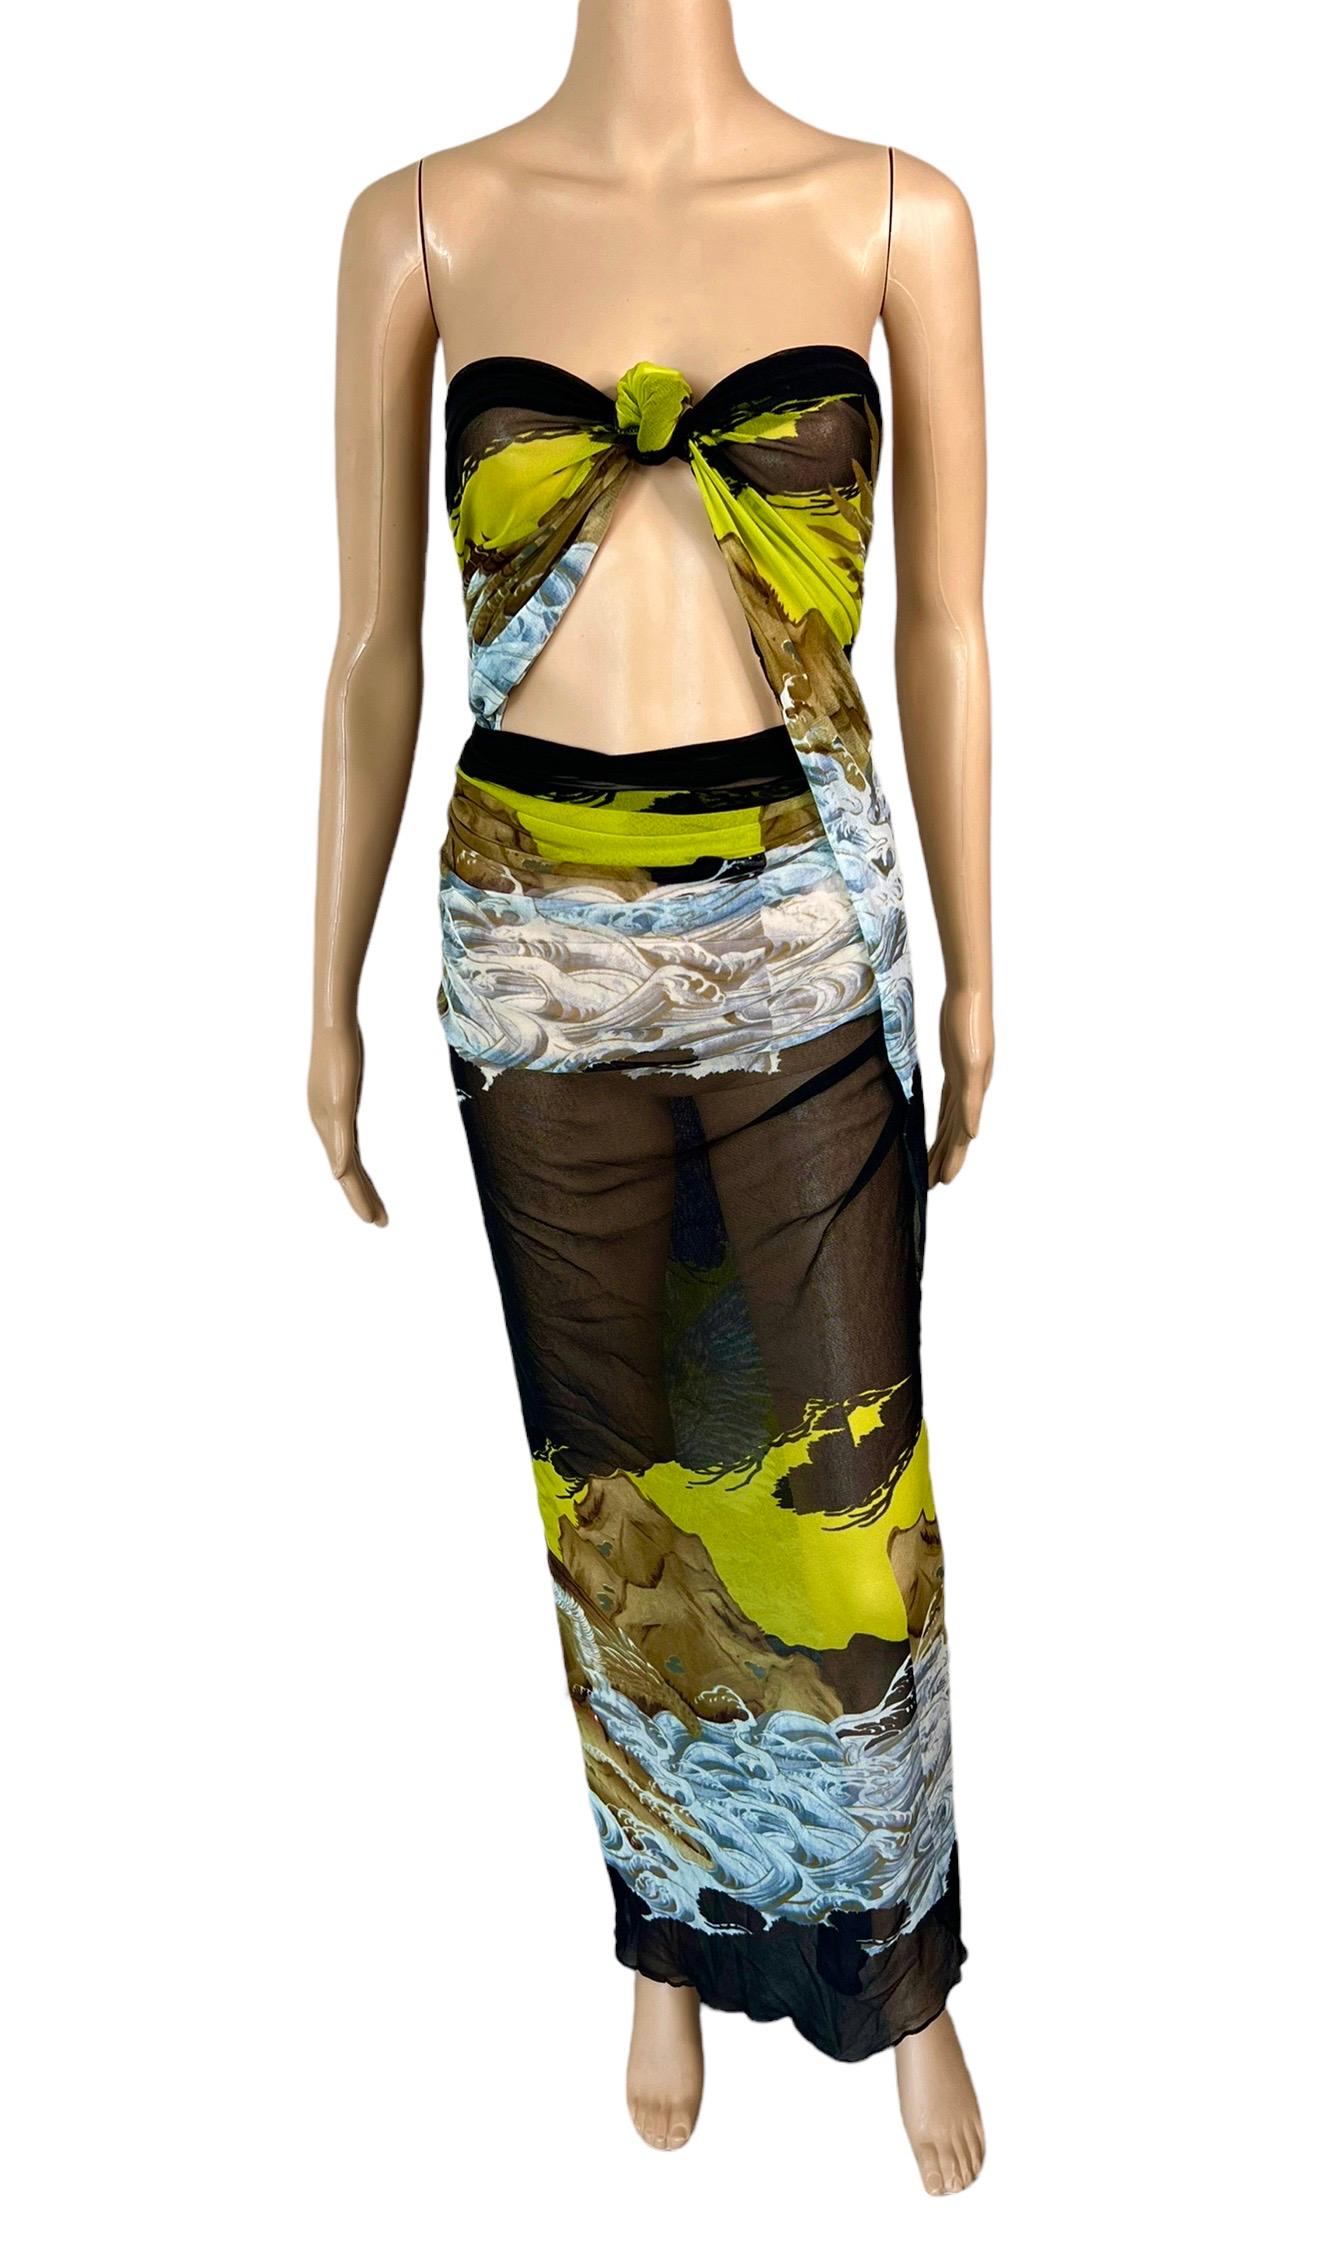 Jean Paul Gaultier Soleil Vintage Eagle Tattoo Print Mesh Wrap Dress Scarf Sarong Pareo

Please note this pareo is very versatile and can be styled multiple ways based on preference as seen in photos.

